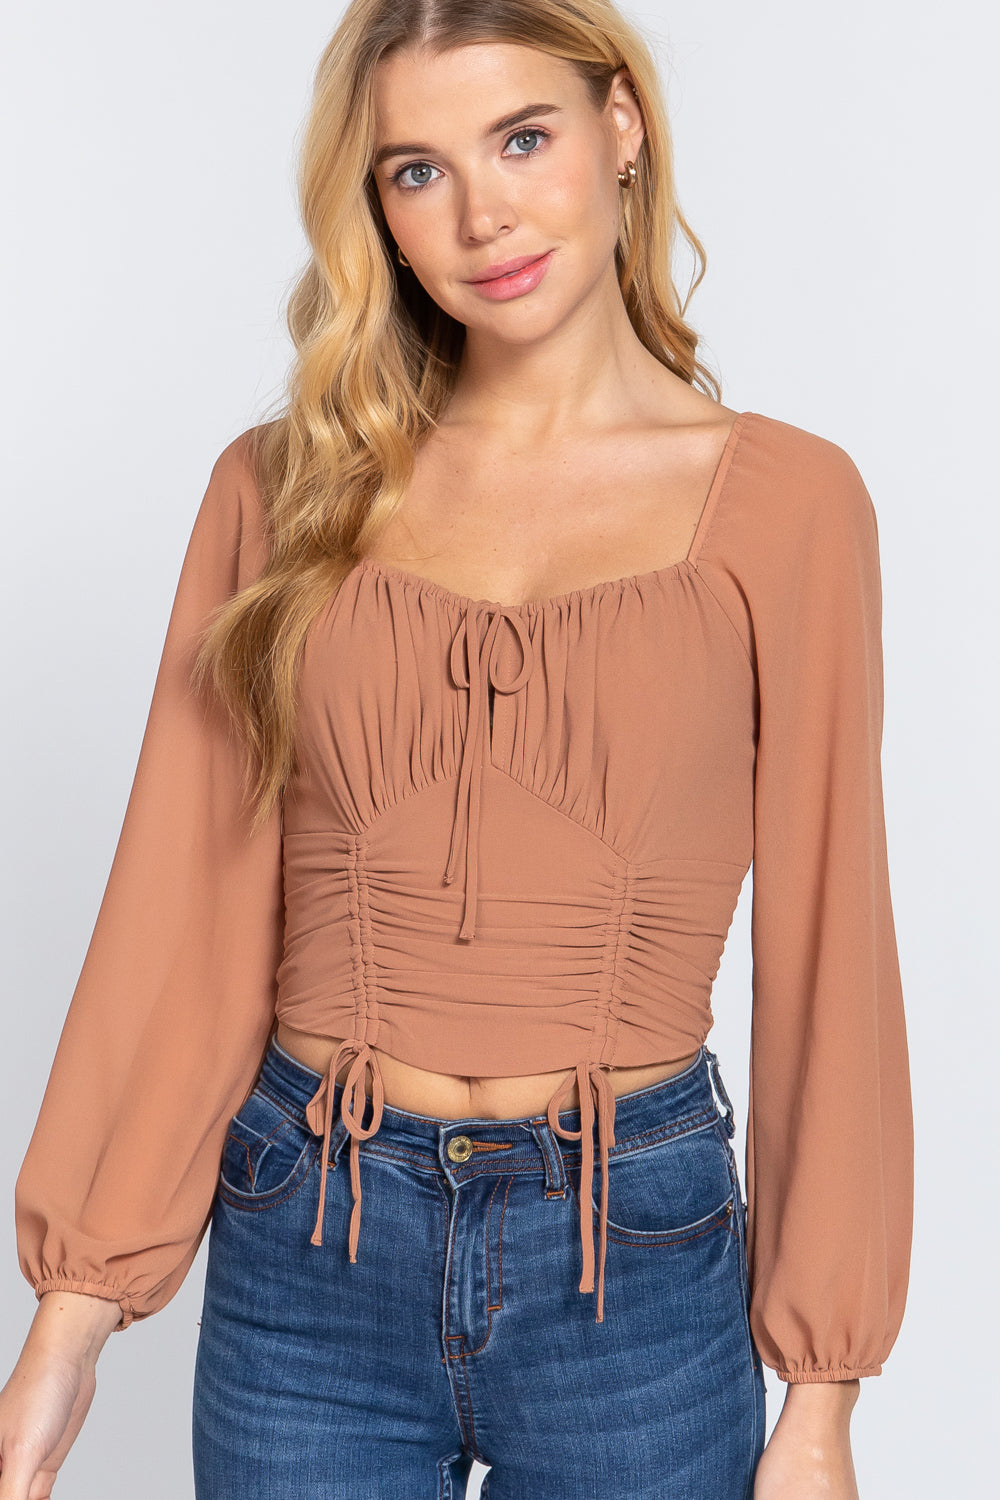 Long Sleeve Front Tied Ruched Detail Woven Top - Tigbul's Fashion